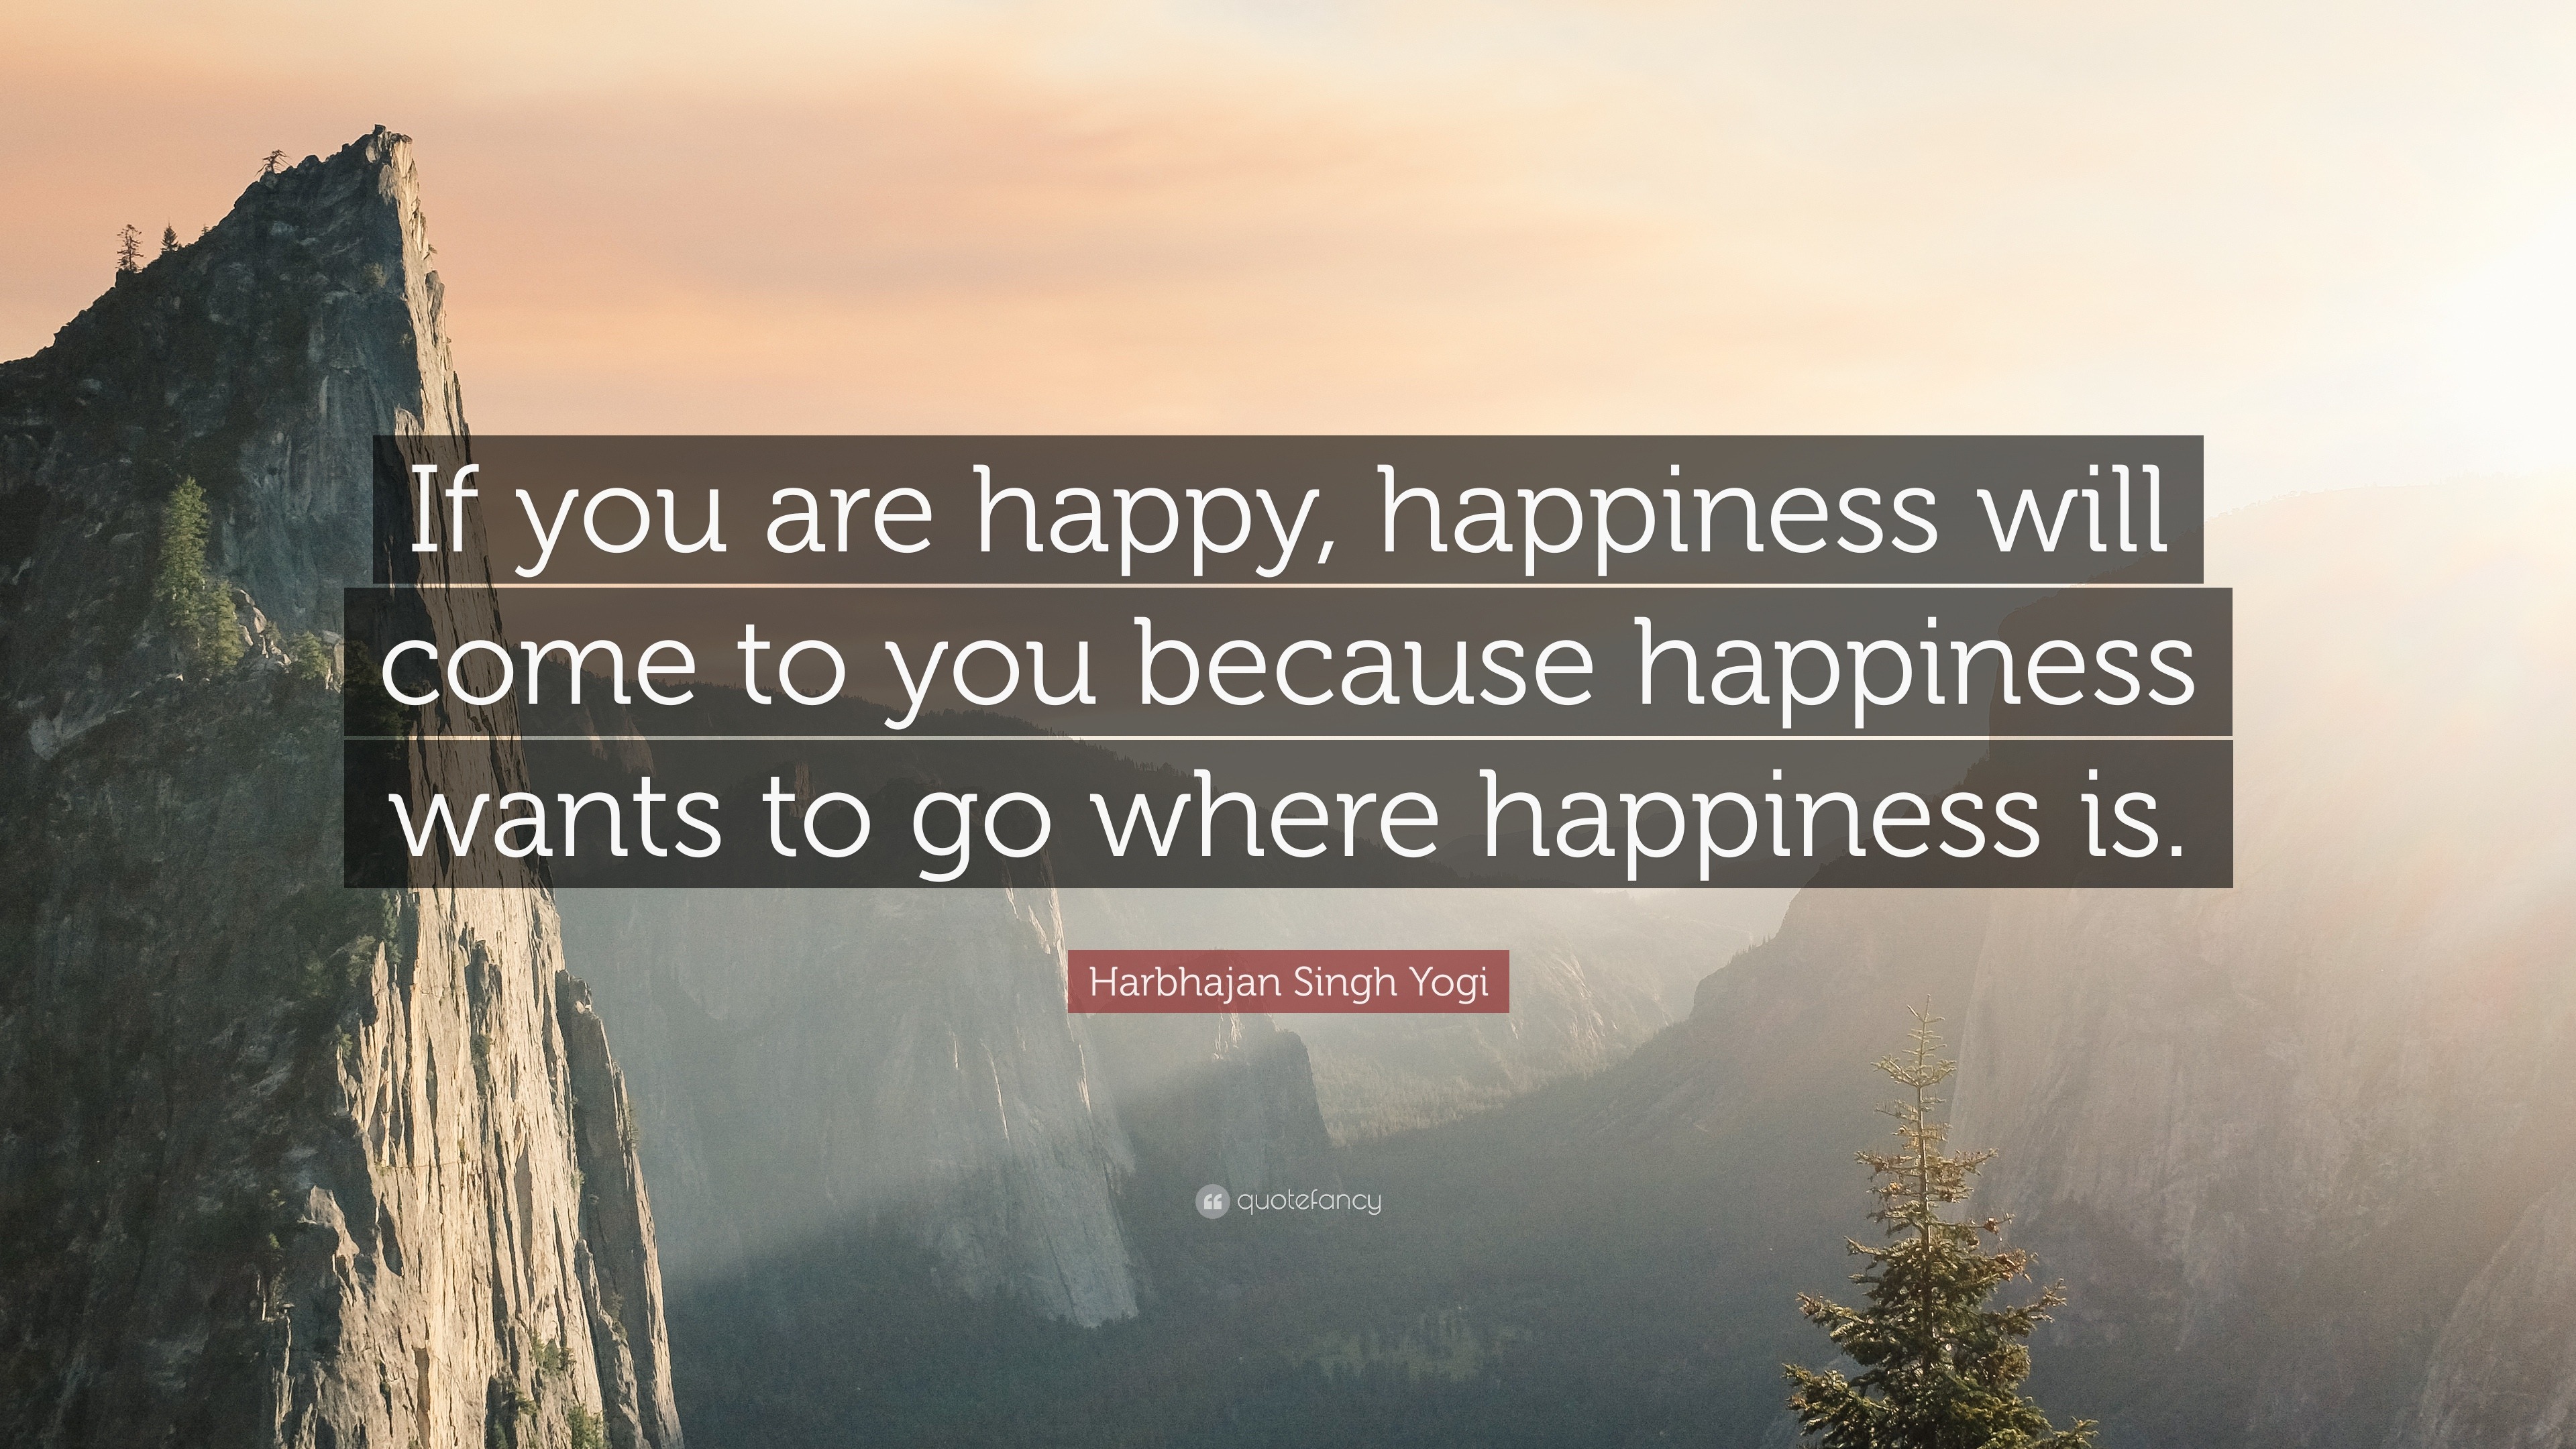 Harbhajan Singh Yogi Quote If You Are Happy Happiness Will Come To You Because Happiness Wants To Go Where Happiness Is 7 Wallpapers Quotefancy